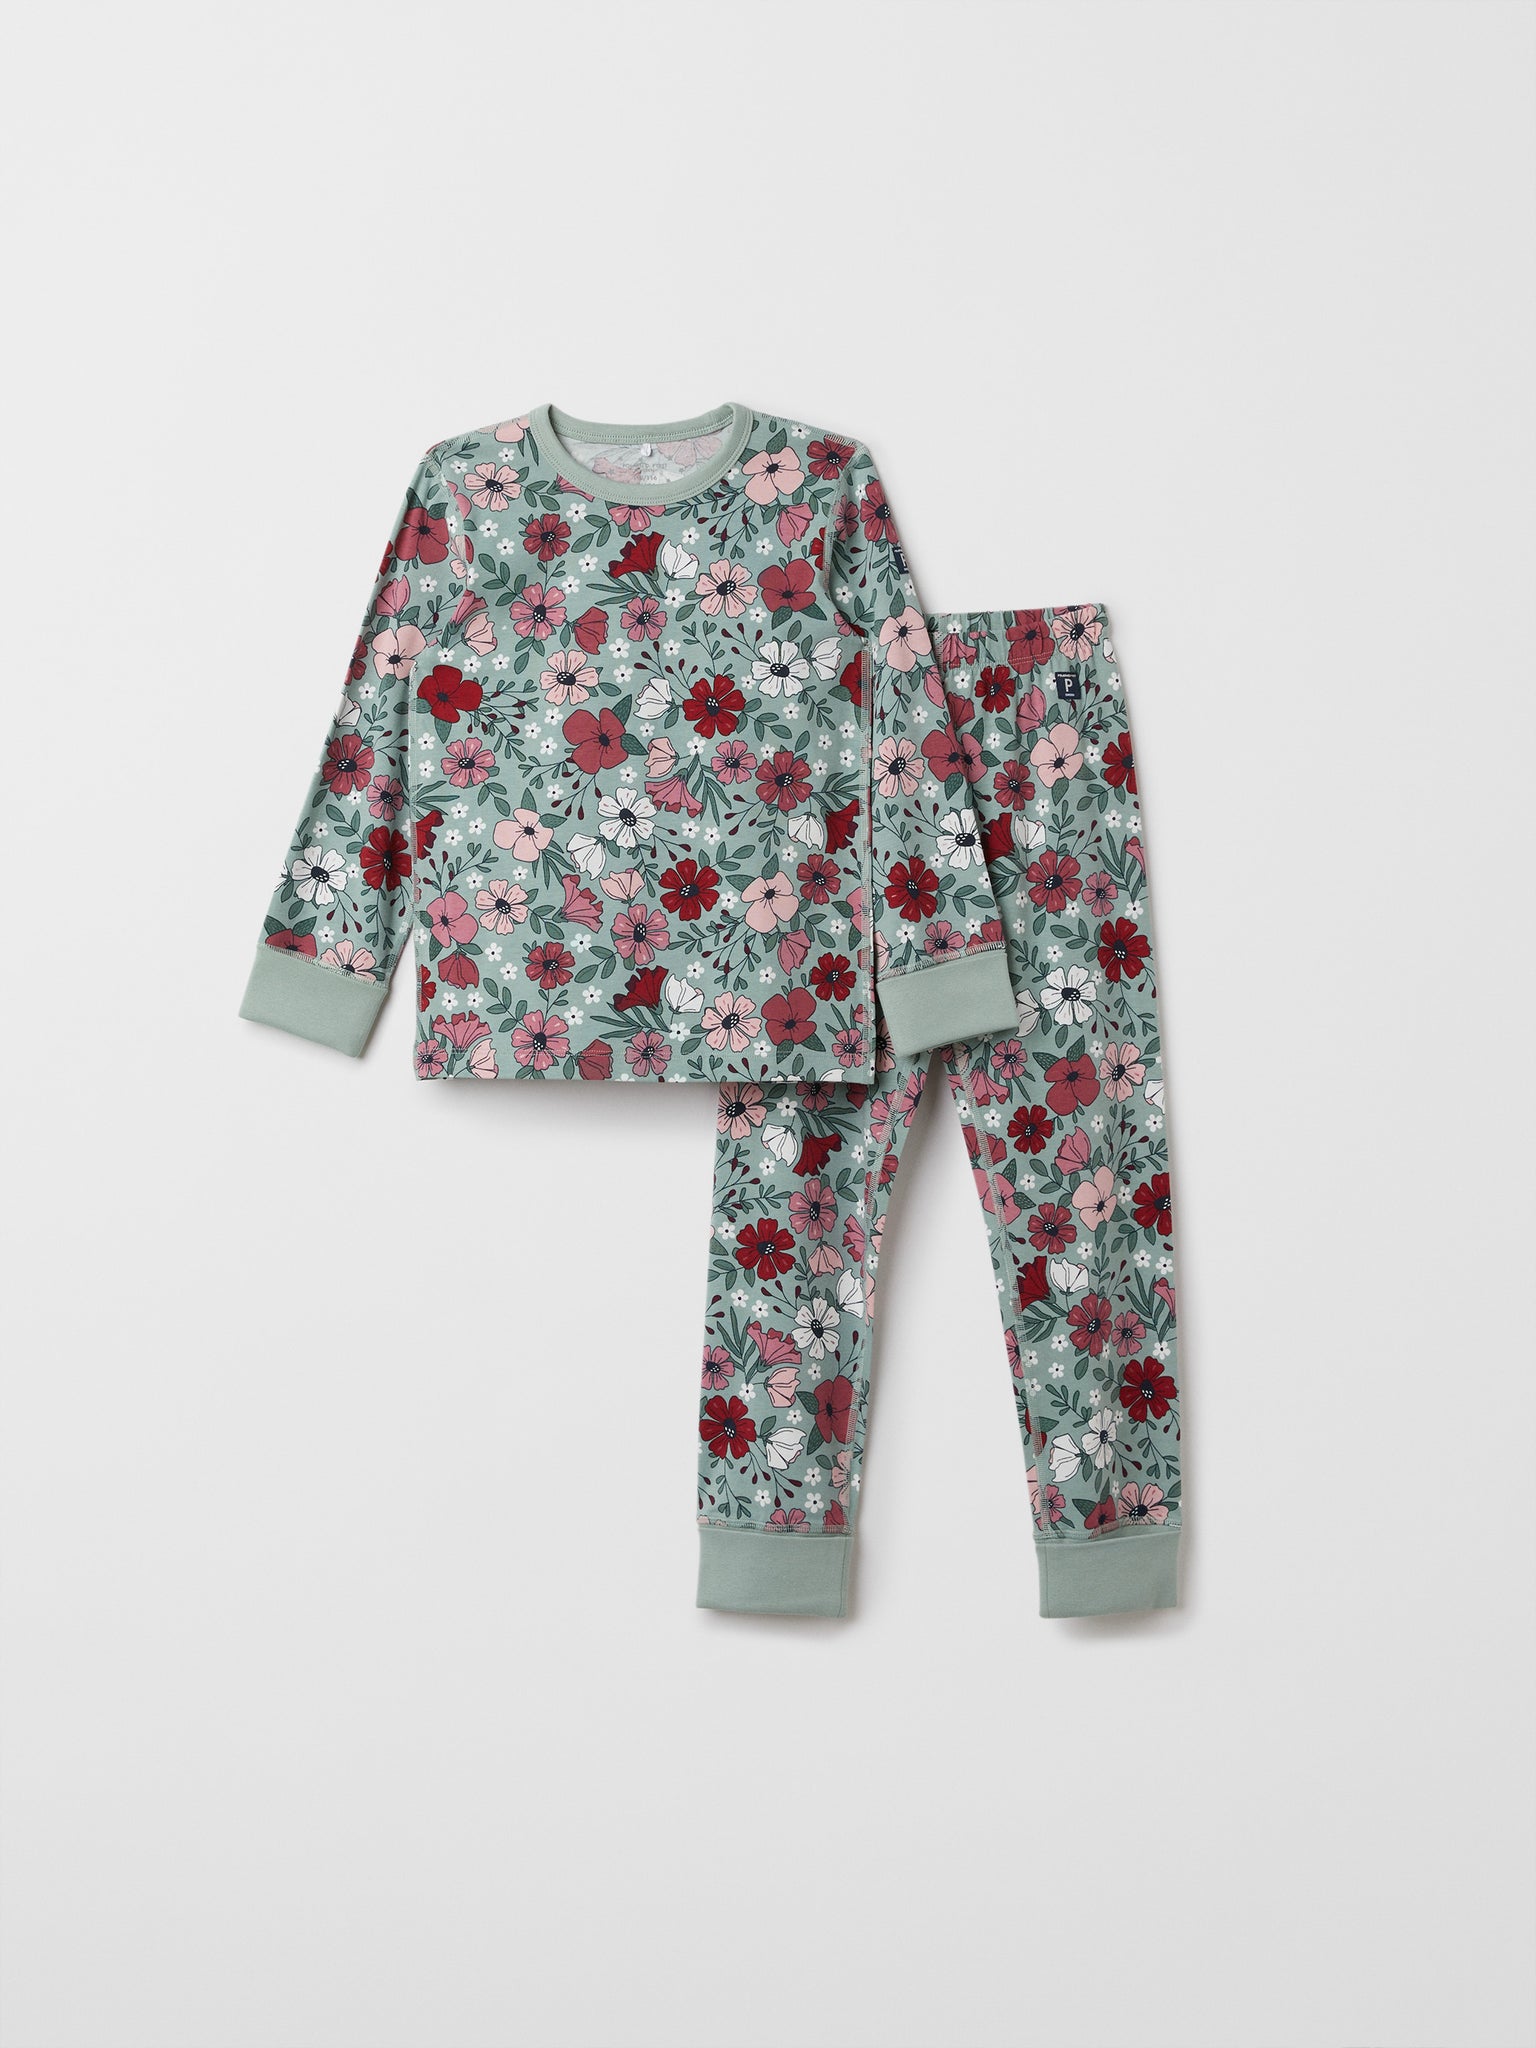 Green Organic Kids Christmas Pyjamas from the Polarn O. Pyret kidswear collection. Ethically produced kids clothing.